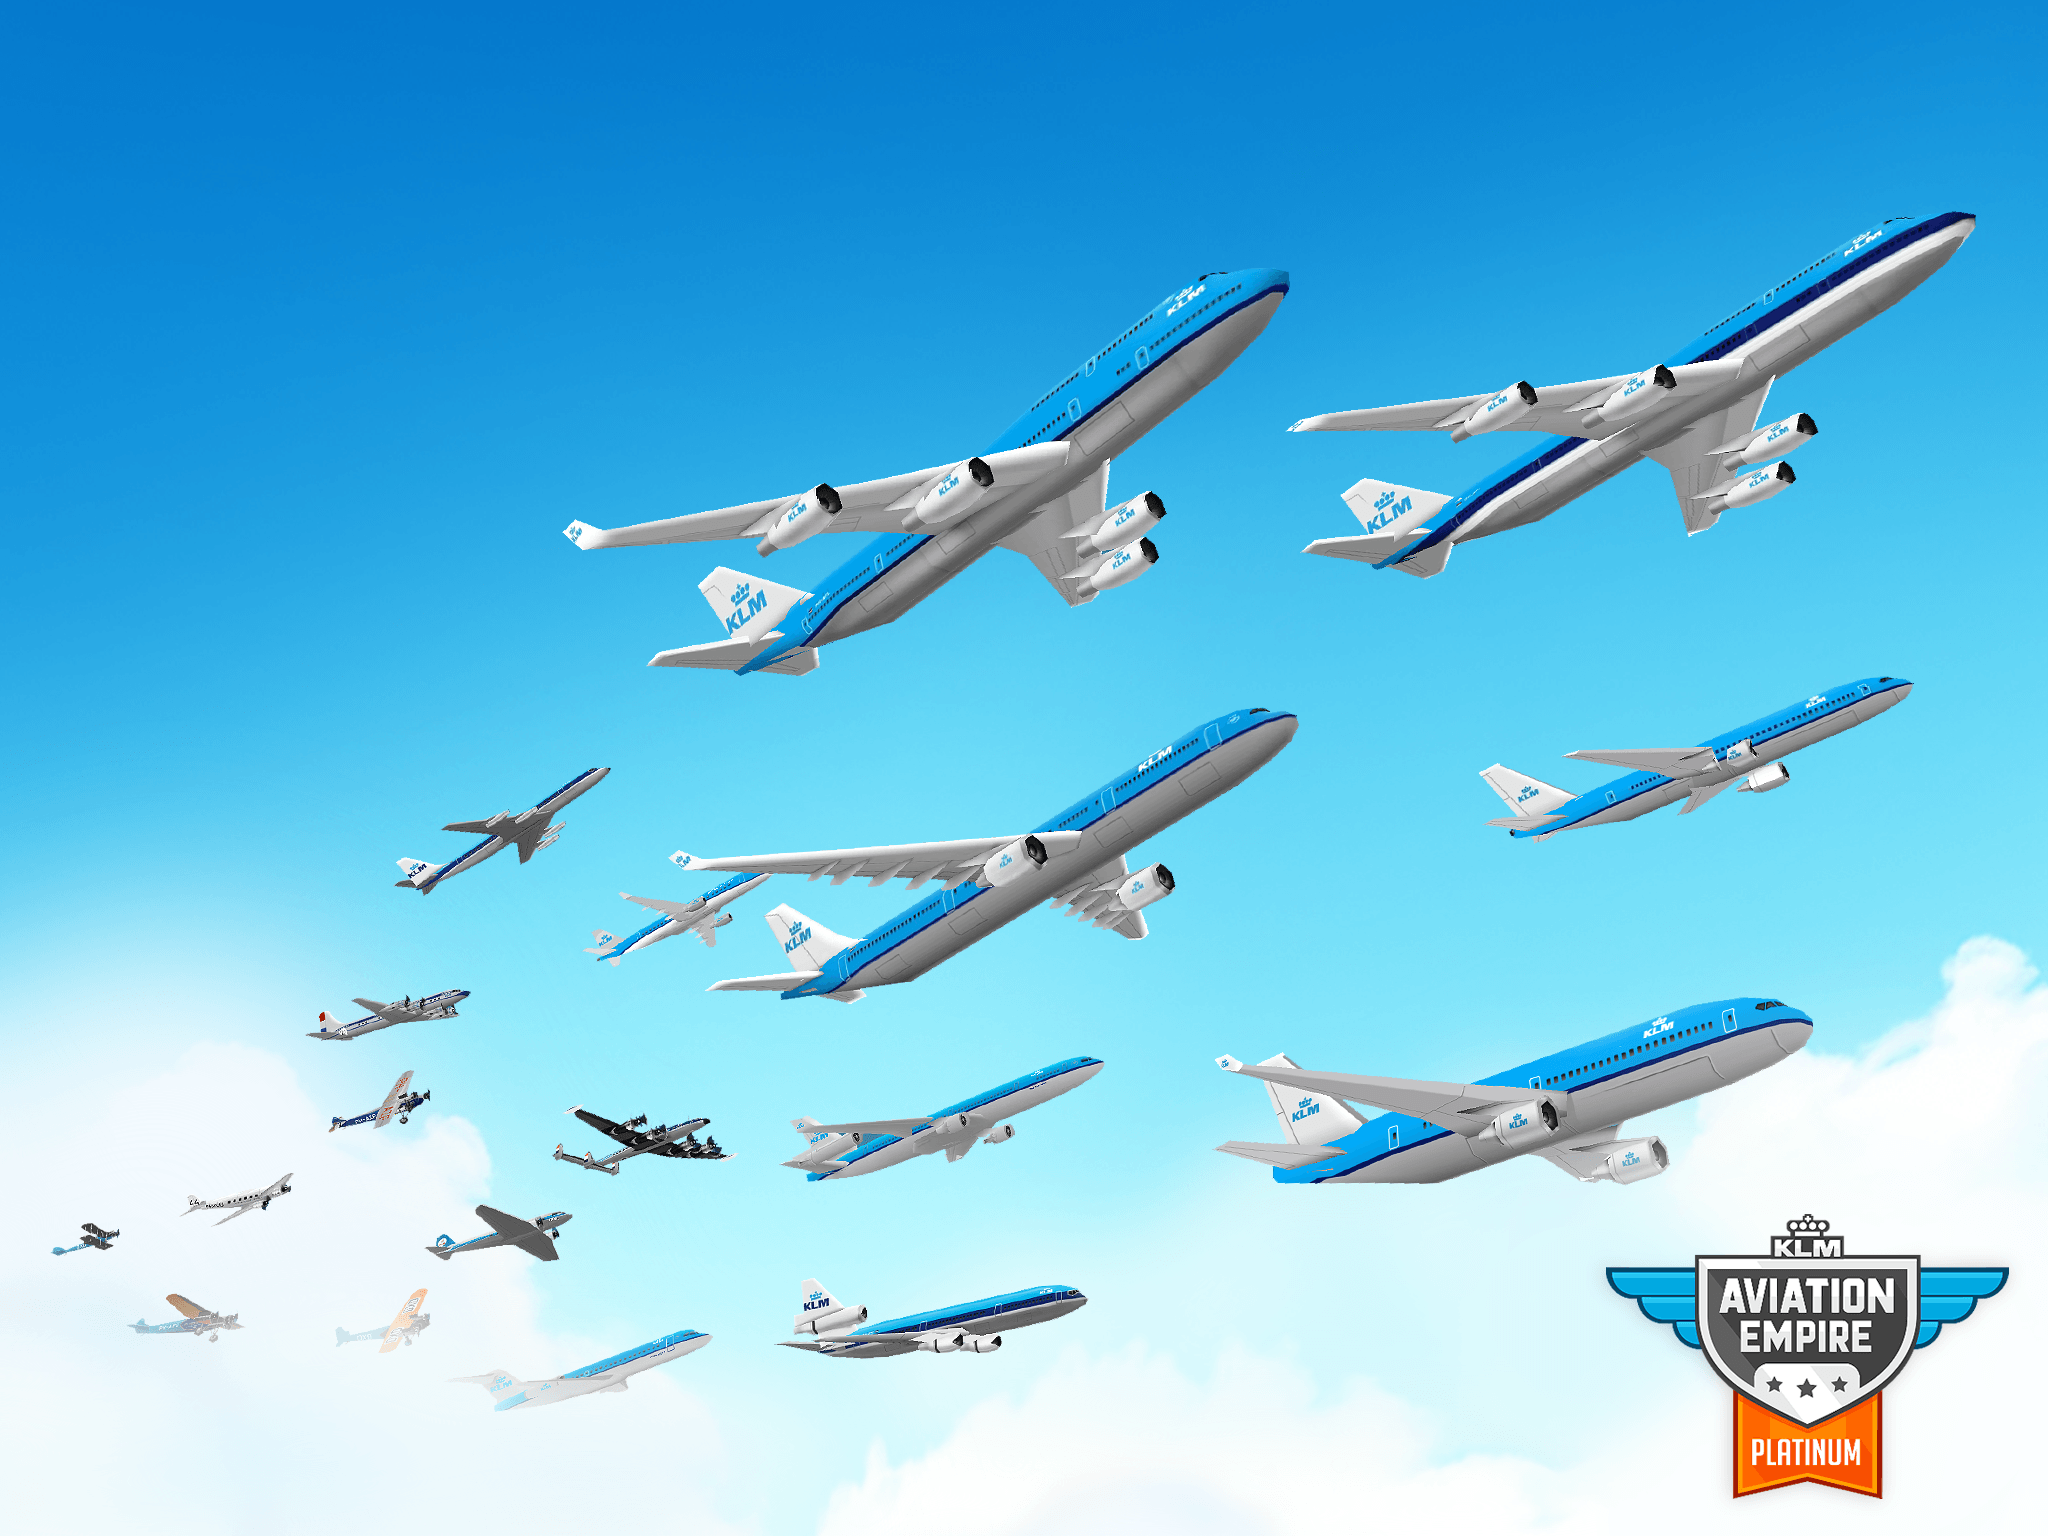 Aviation Empire, KLM's 3D strategic game for iOS and Android